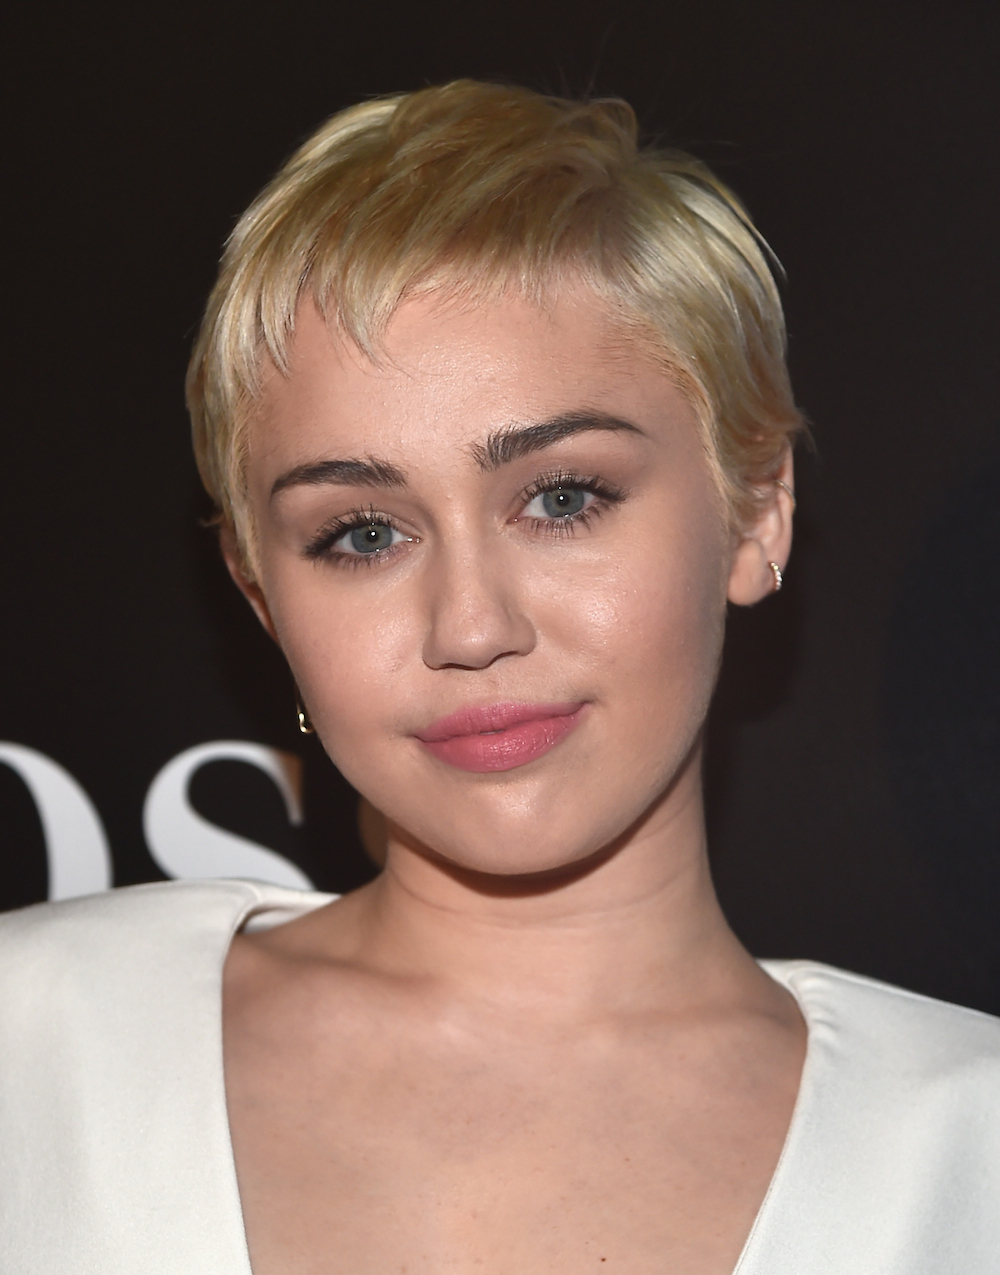 Did Miley Cyrus Get Plastic Surgery New Instagram Photo